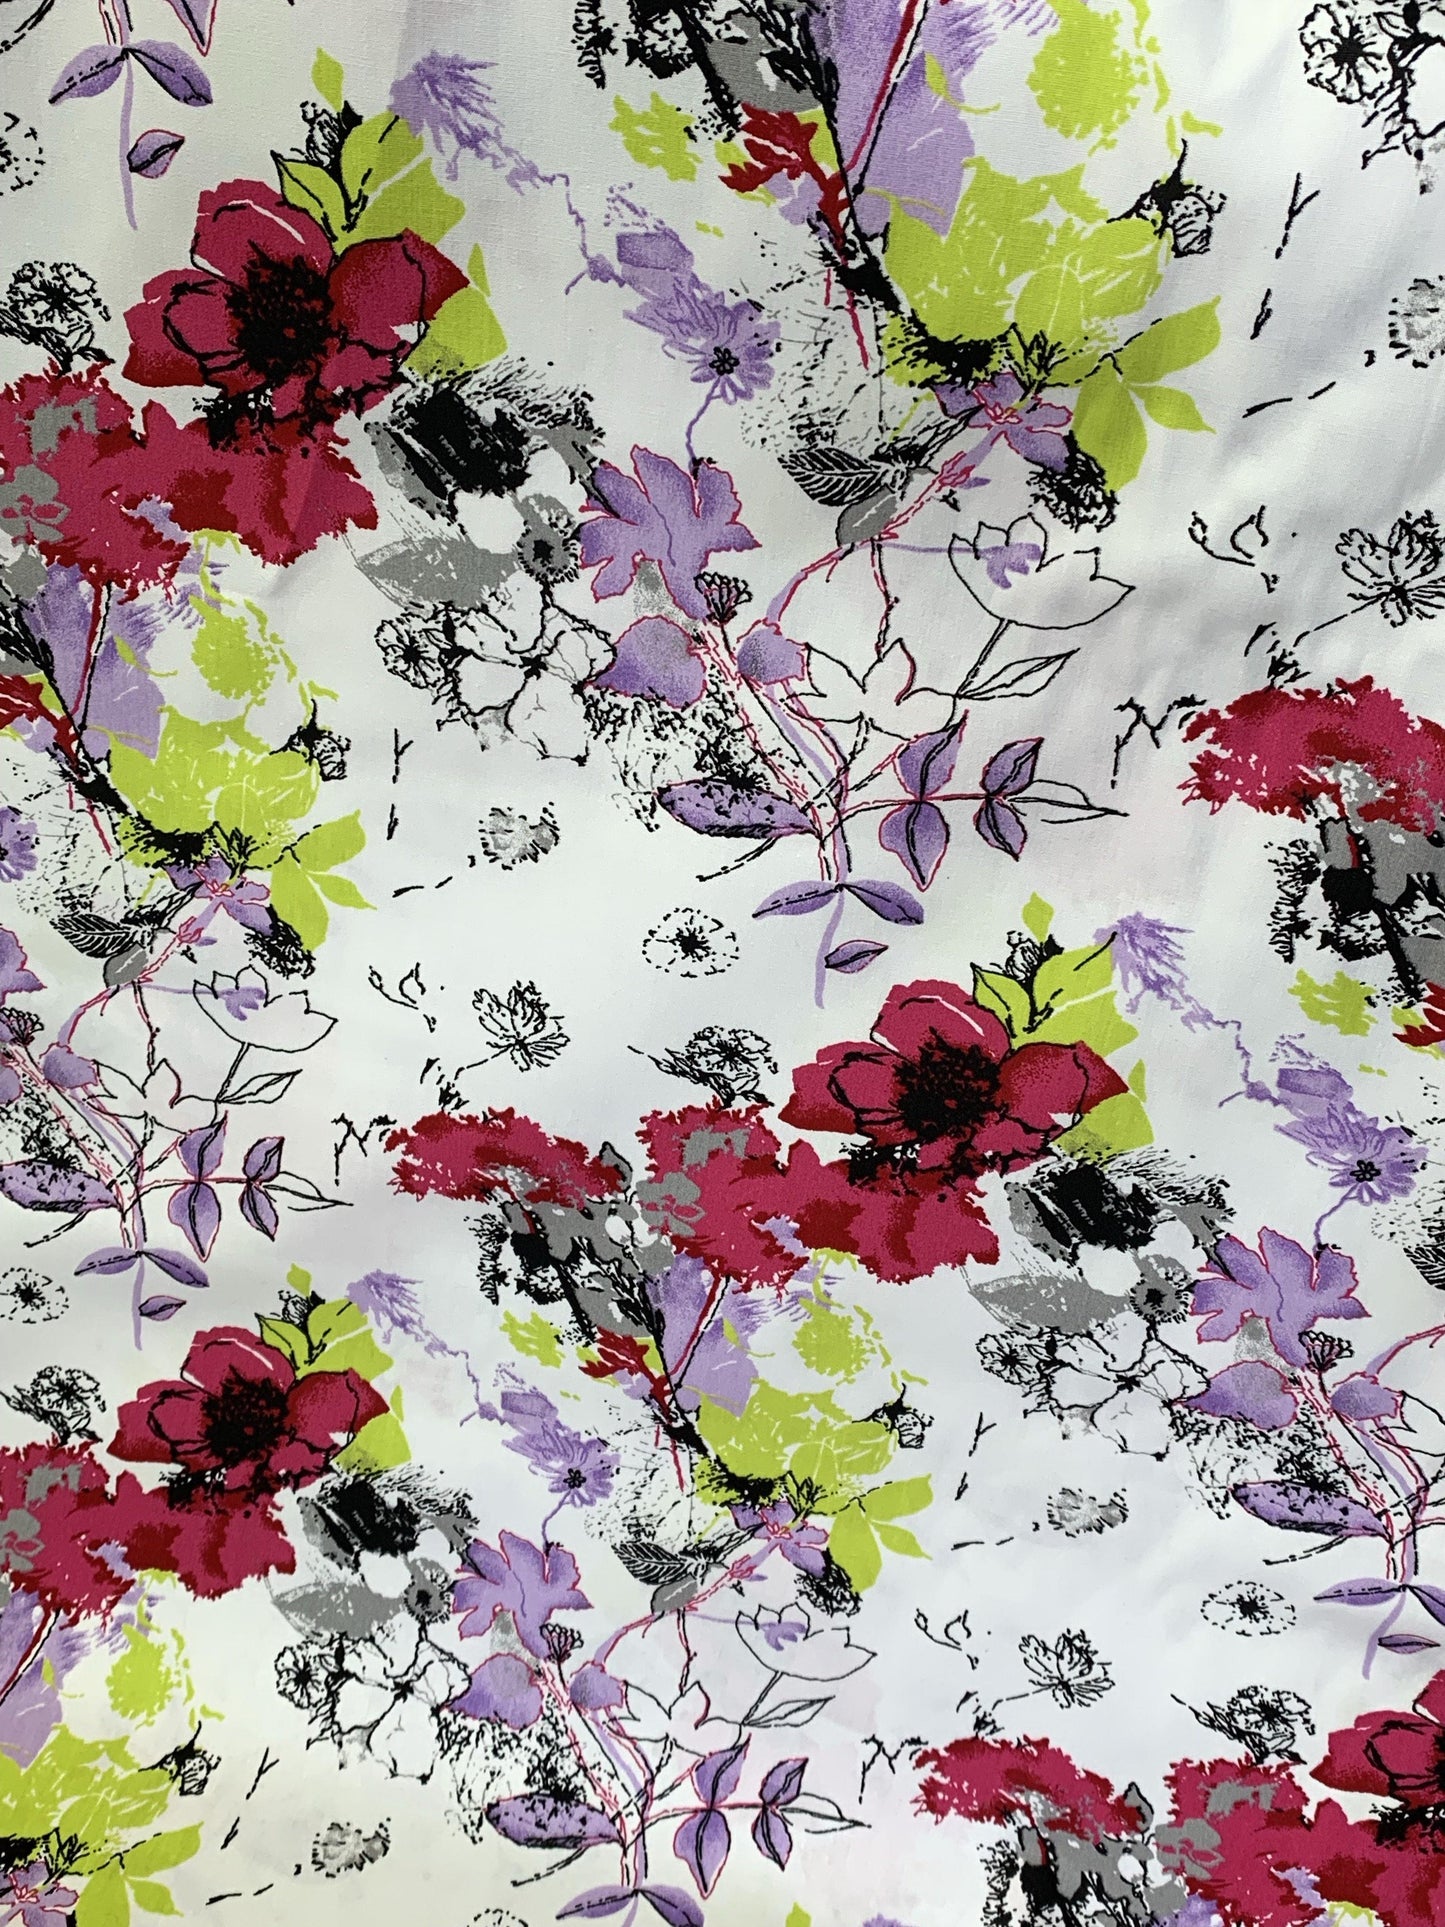 Cotton fabric colorful floral fabric sold by the yard - Sew Much - sewmuchonline